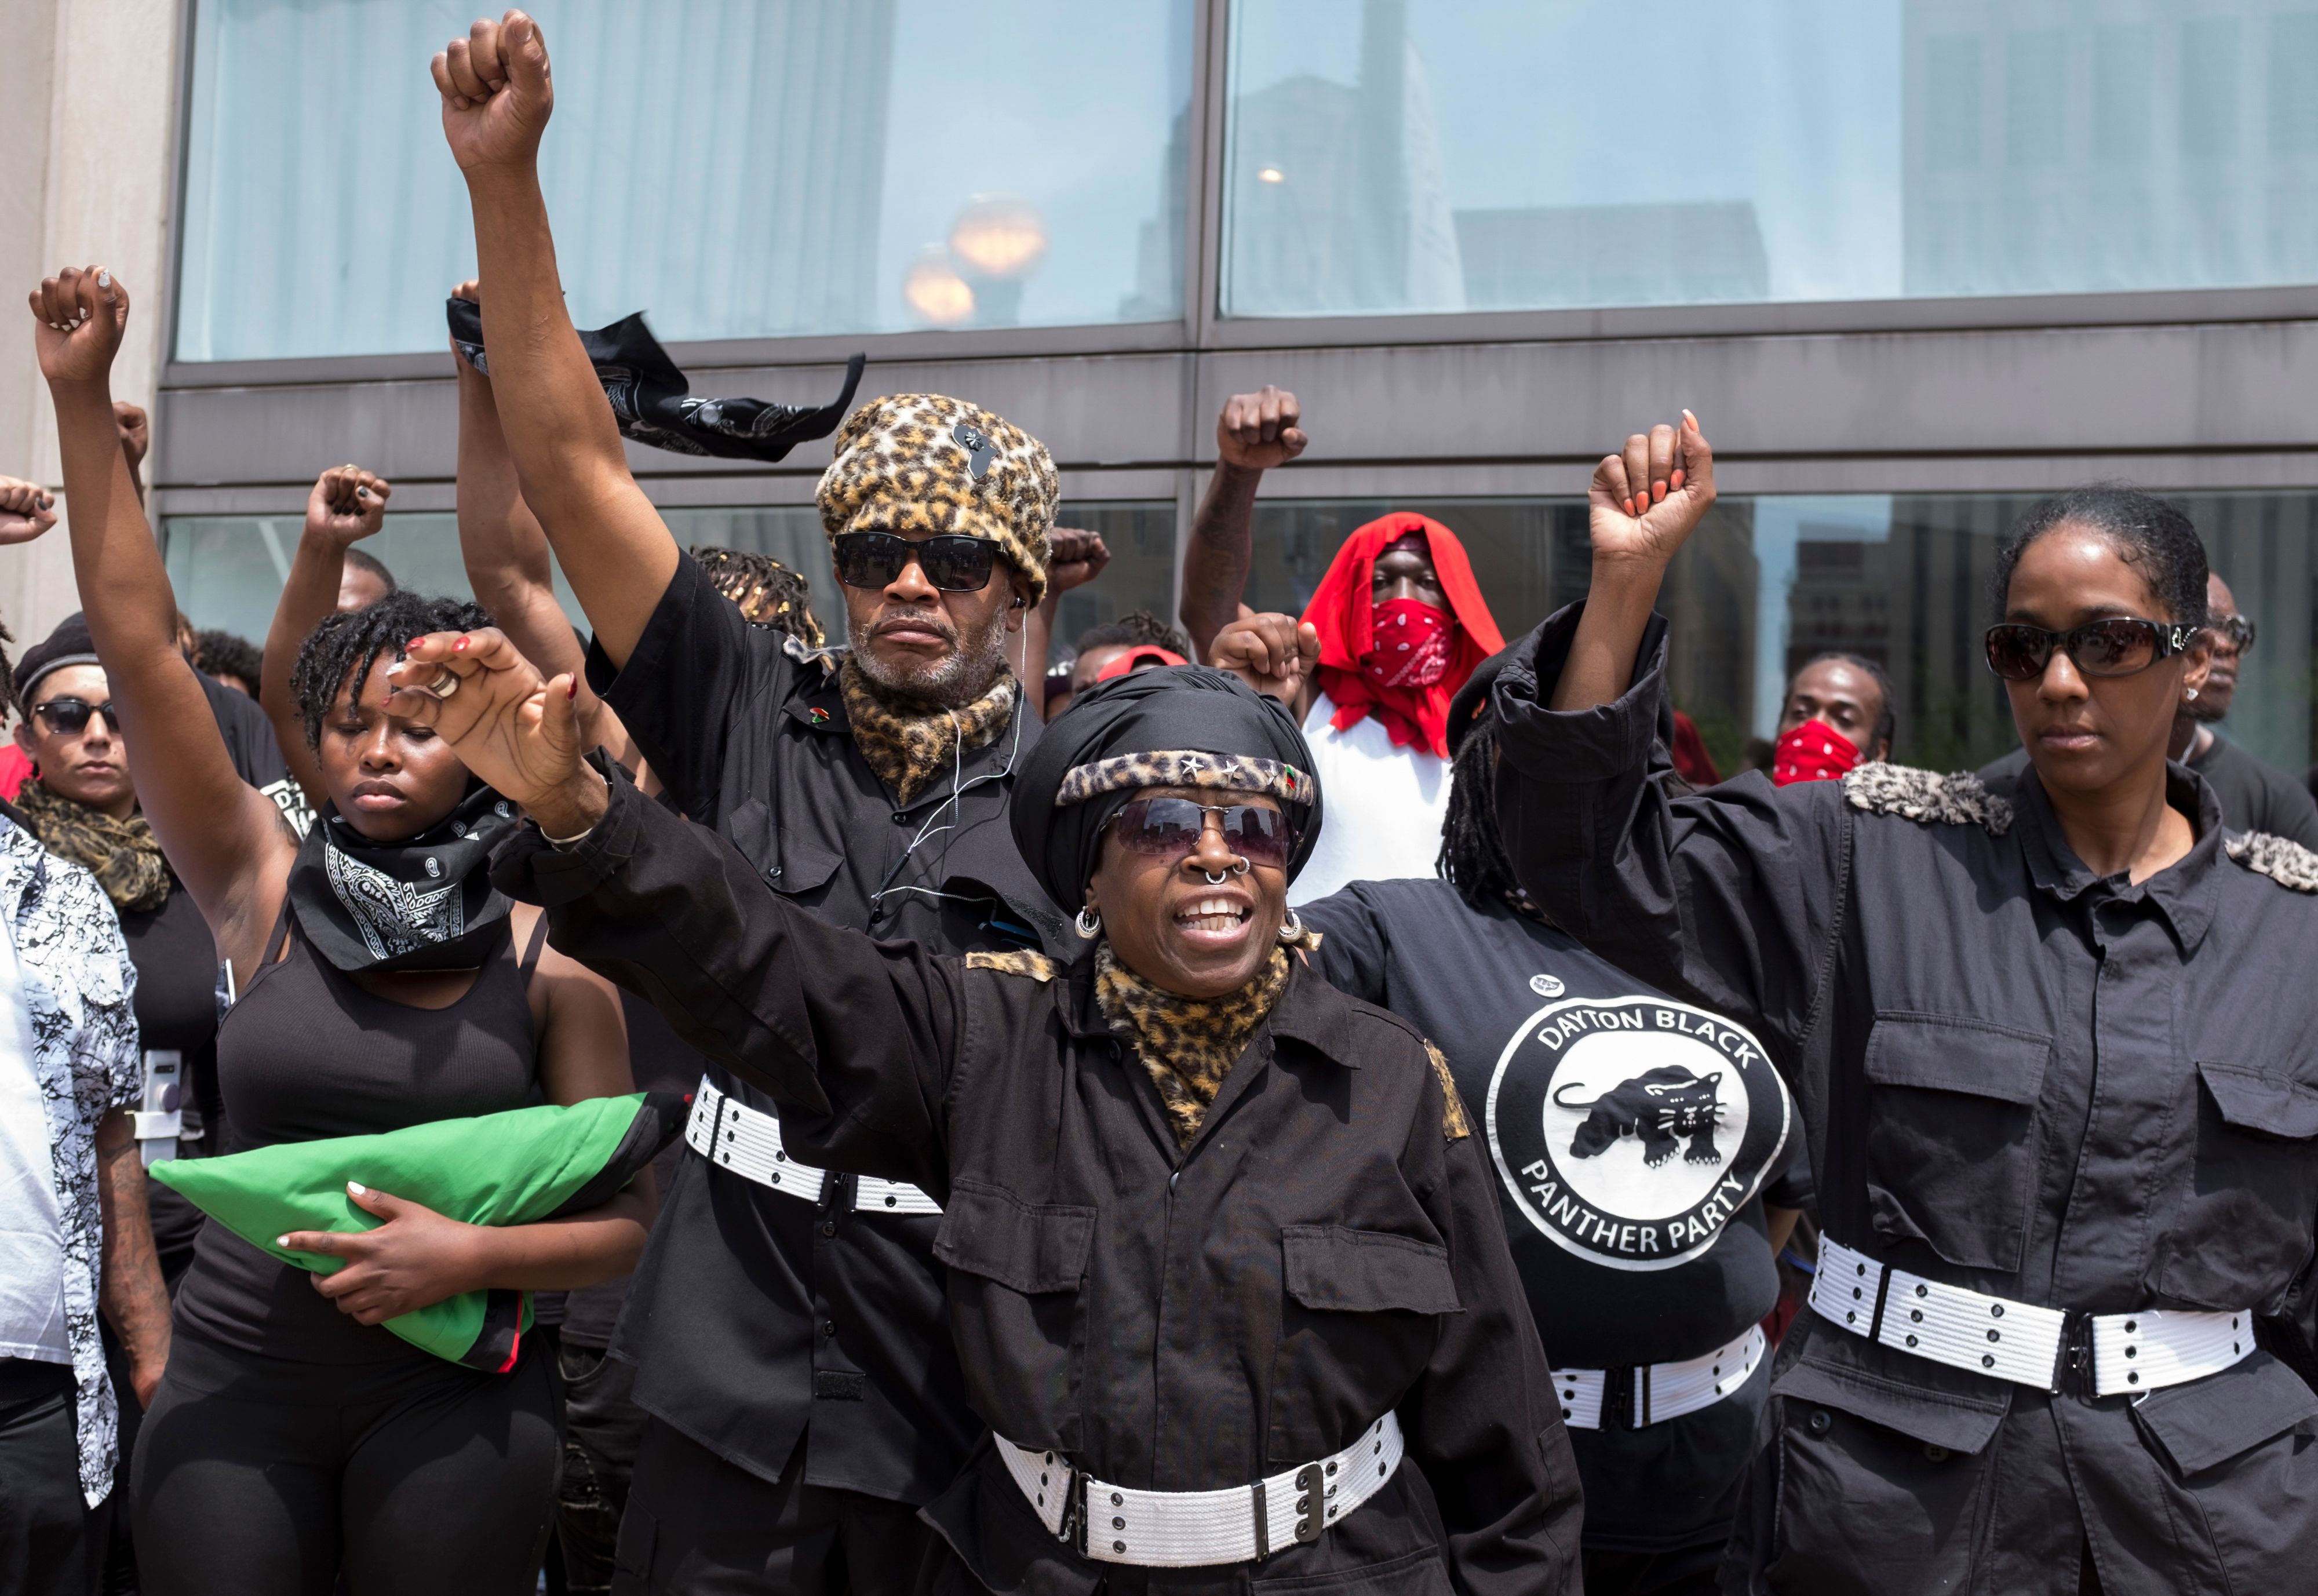 The Dayton chapter of the Black Panthers protest against a small group from the KKK-affiliated Honorable Sacred Knights during a rally in Dayton, Ohio, May 25, 2019. (SETH HERALD/AFP/Getty Images)